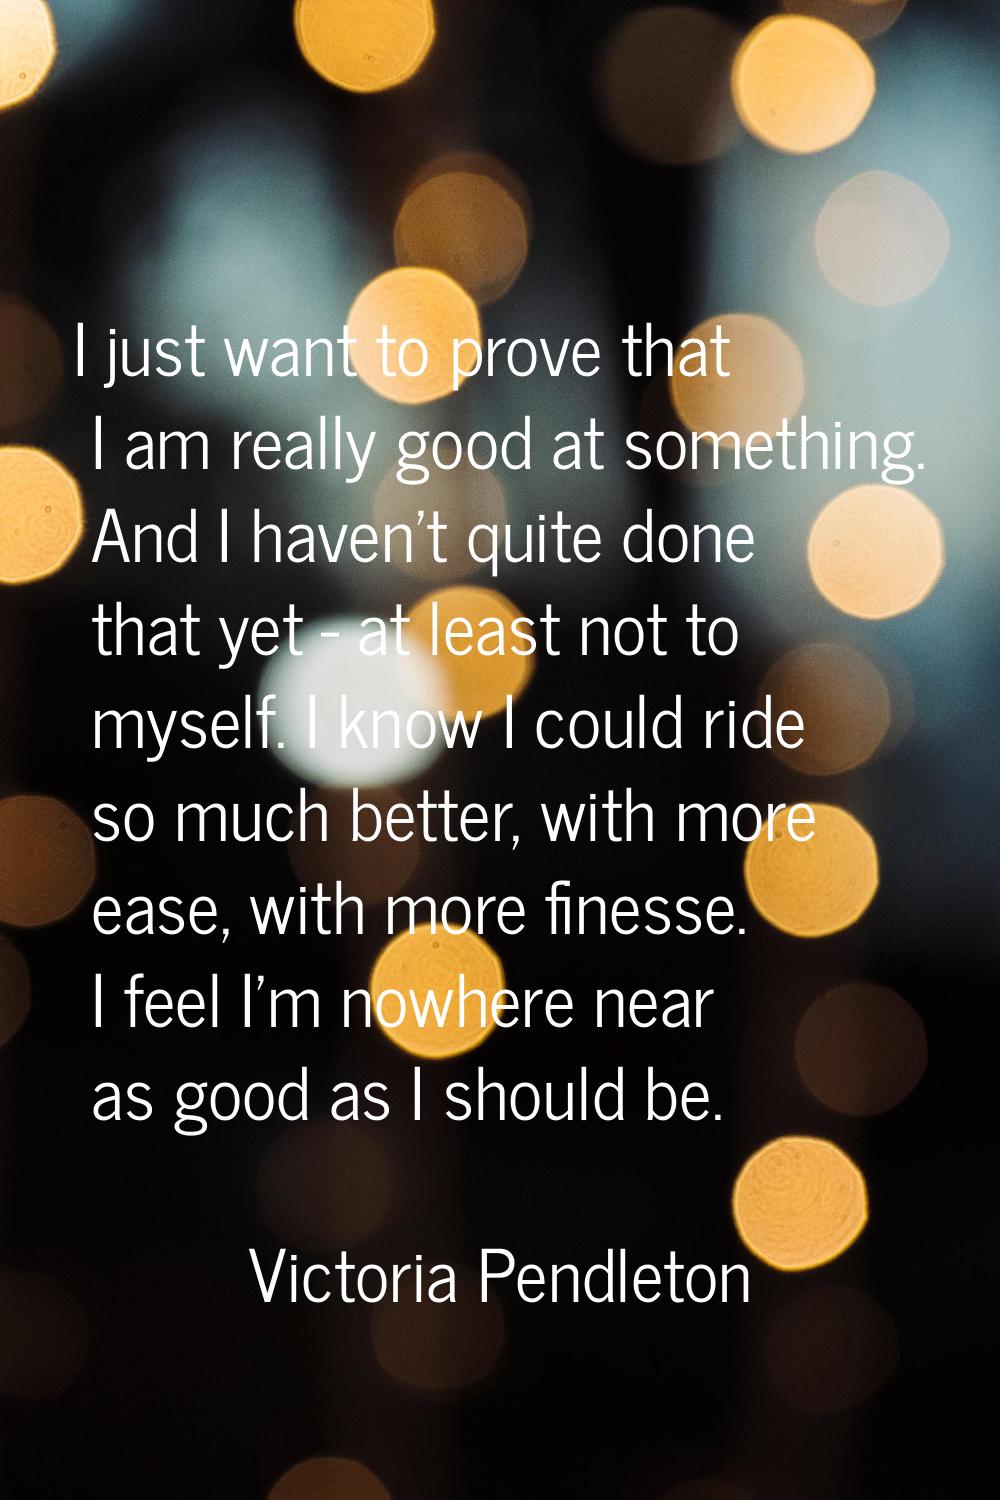 I just want to prove that I am really good at something. And I haven't quite done that yet - at lea